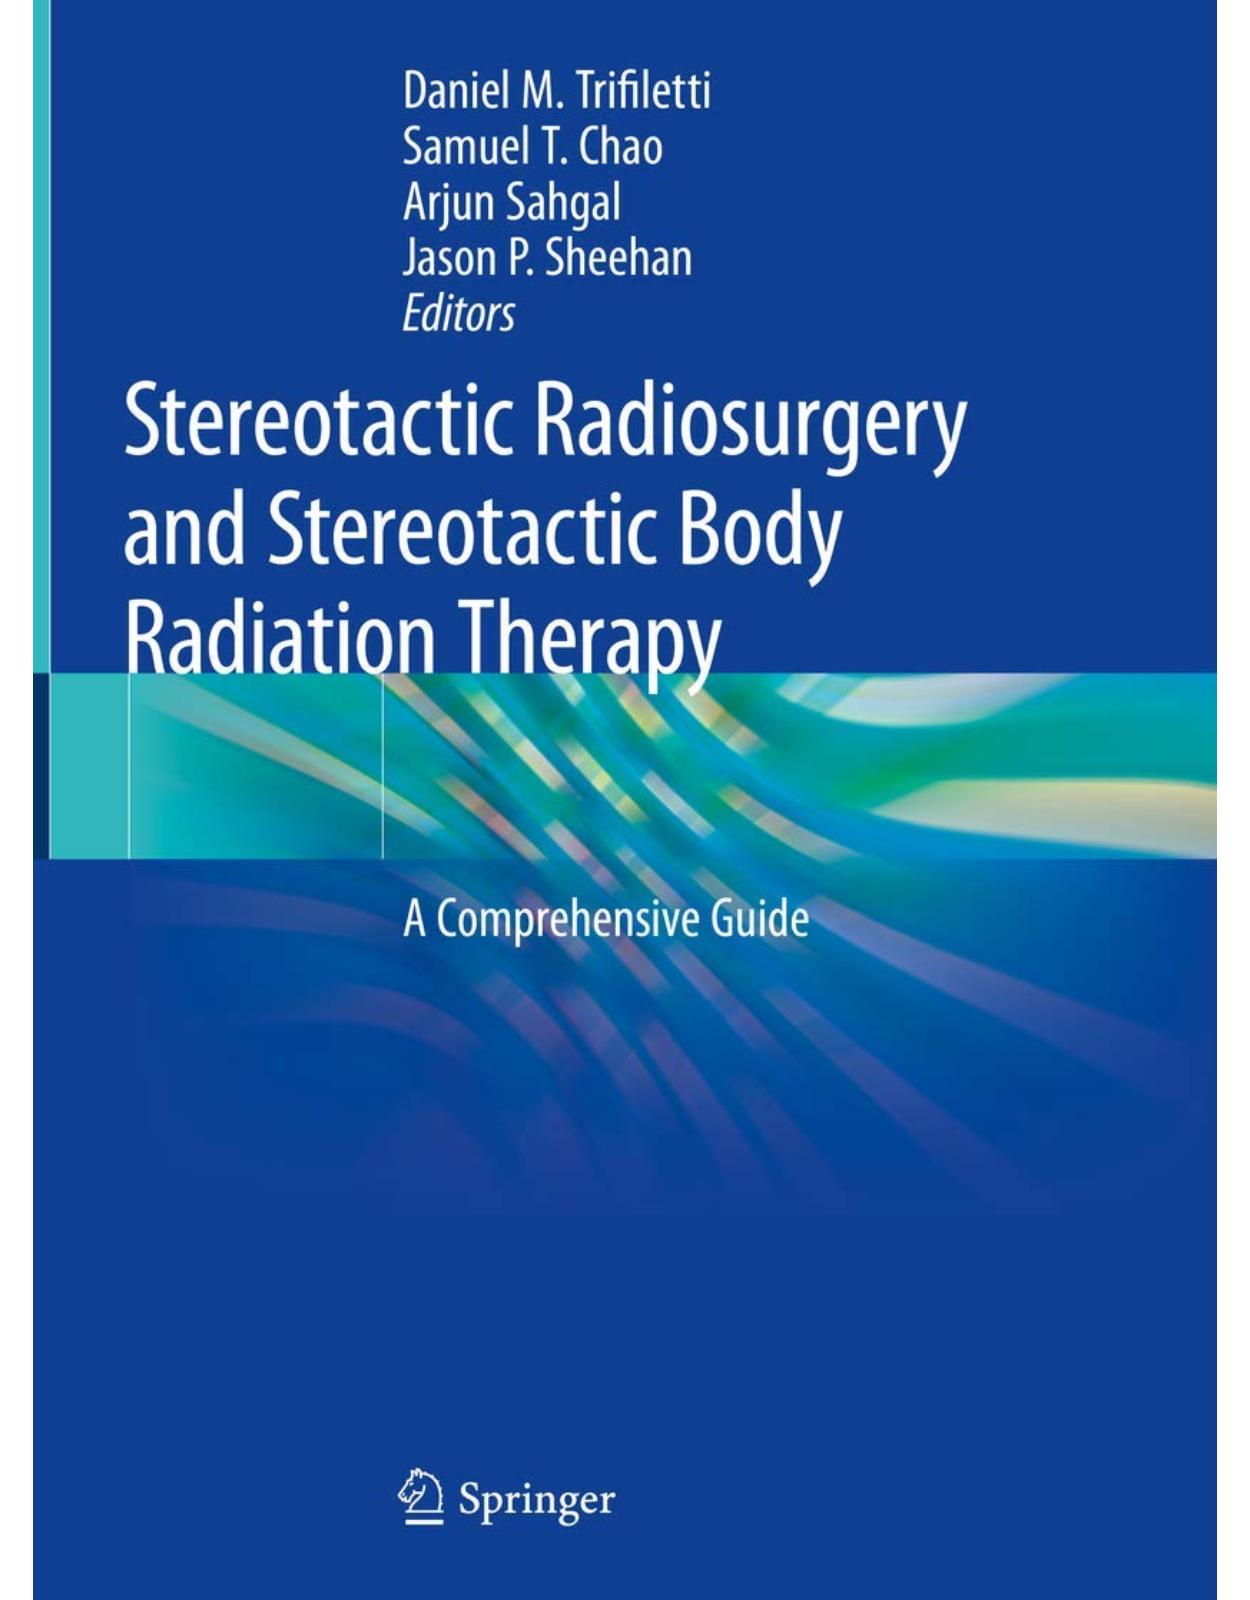 Stereotactic Radiosurgery and Stereotactic Body Radiation Therap